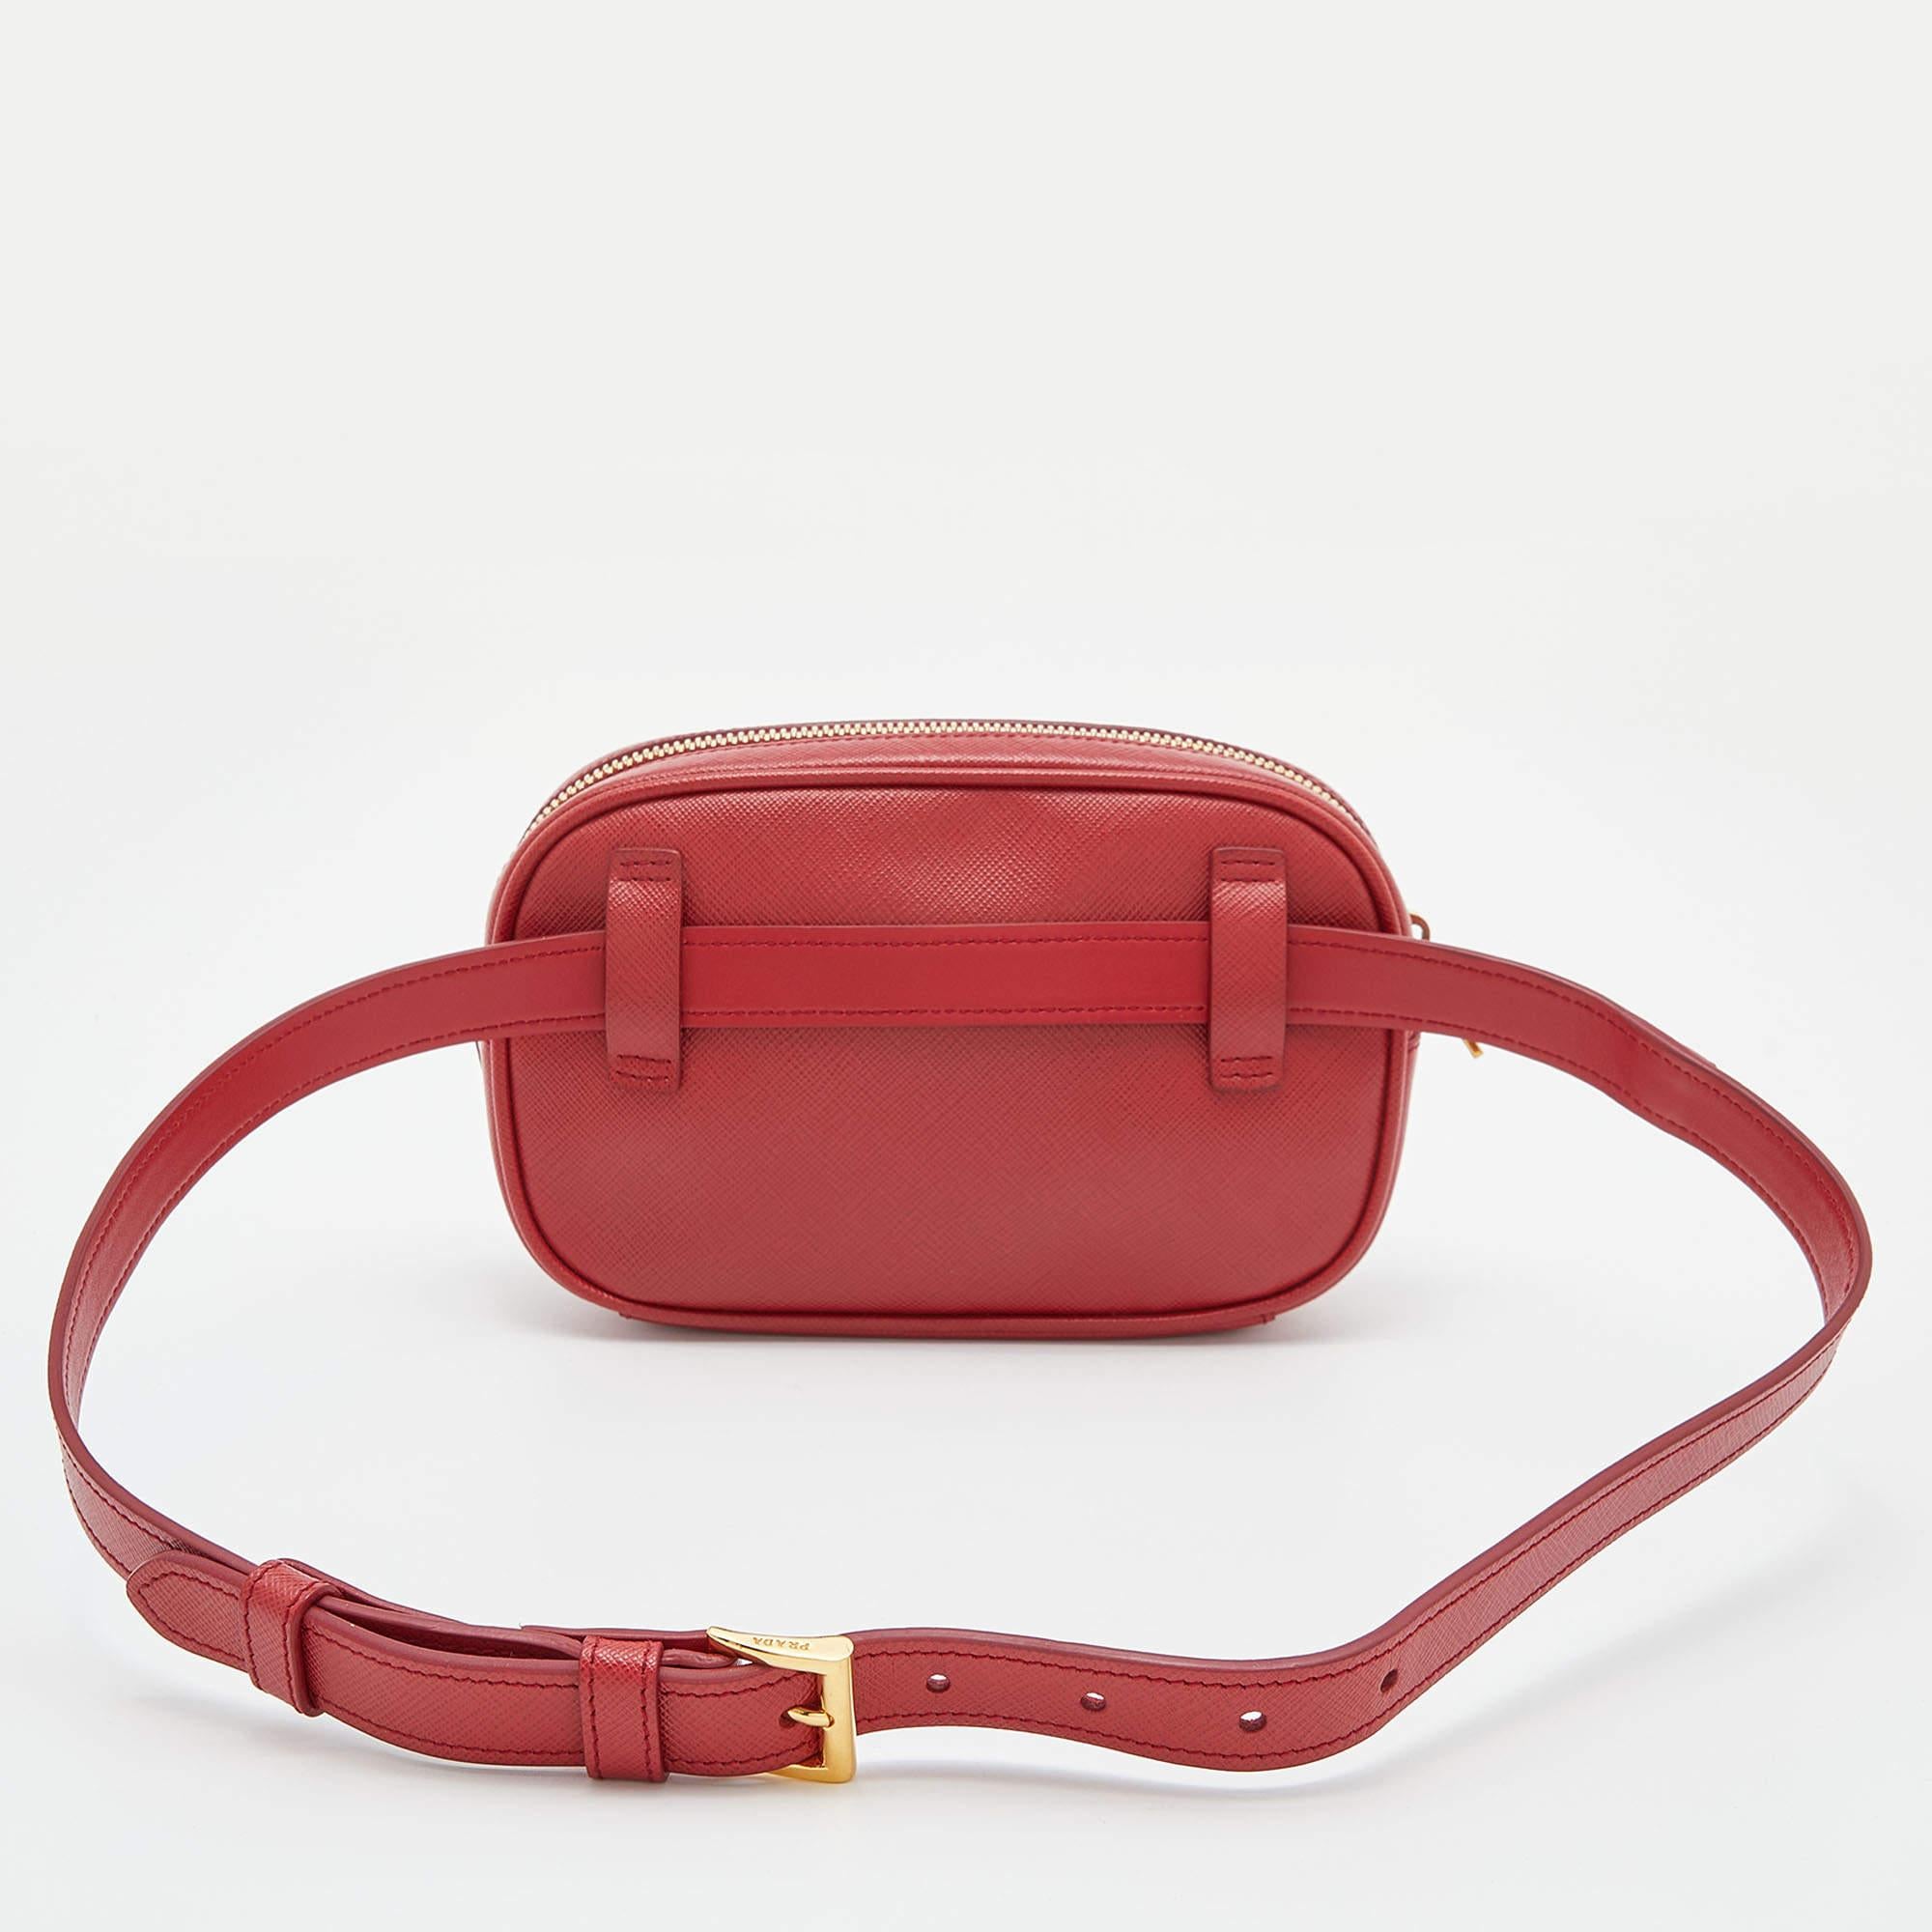 A functional bag with a unique convertible design, this bag by Prada is a winner. Crafted from Saffiano lux leather, it has gold-tone hardware. The nylon-lined interior has pockets to store your little essentials.

Includes: Original Dustbag, Chain